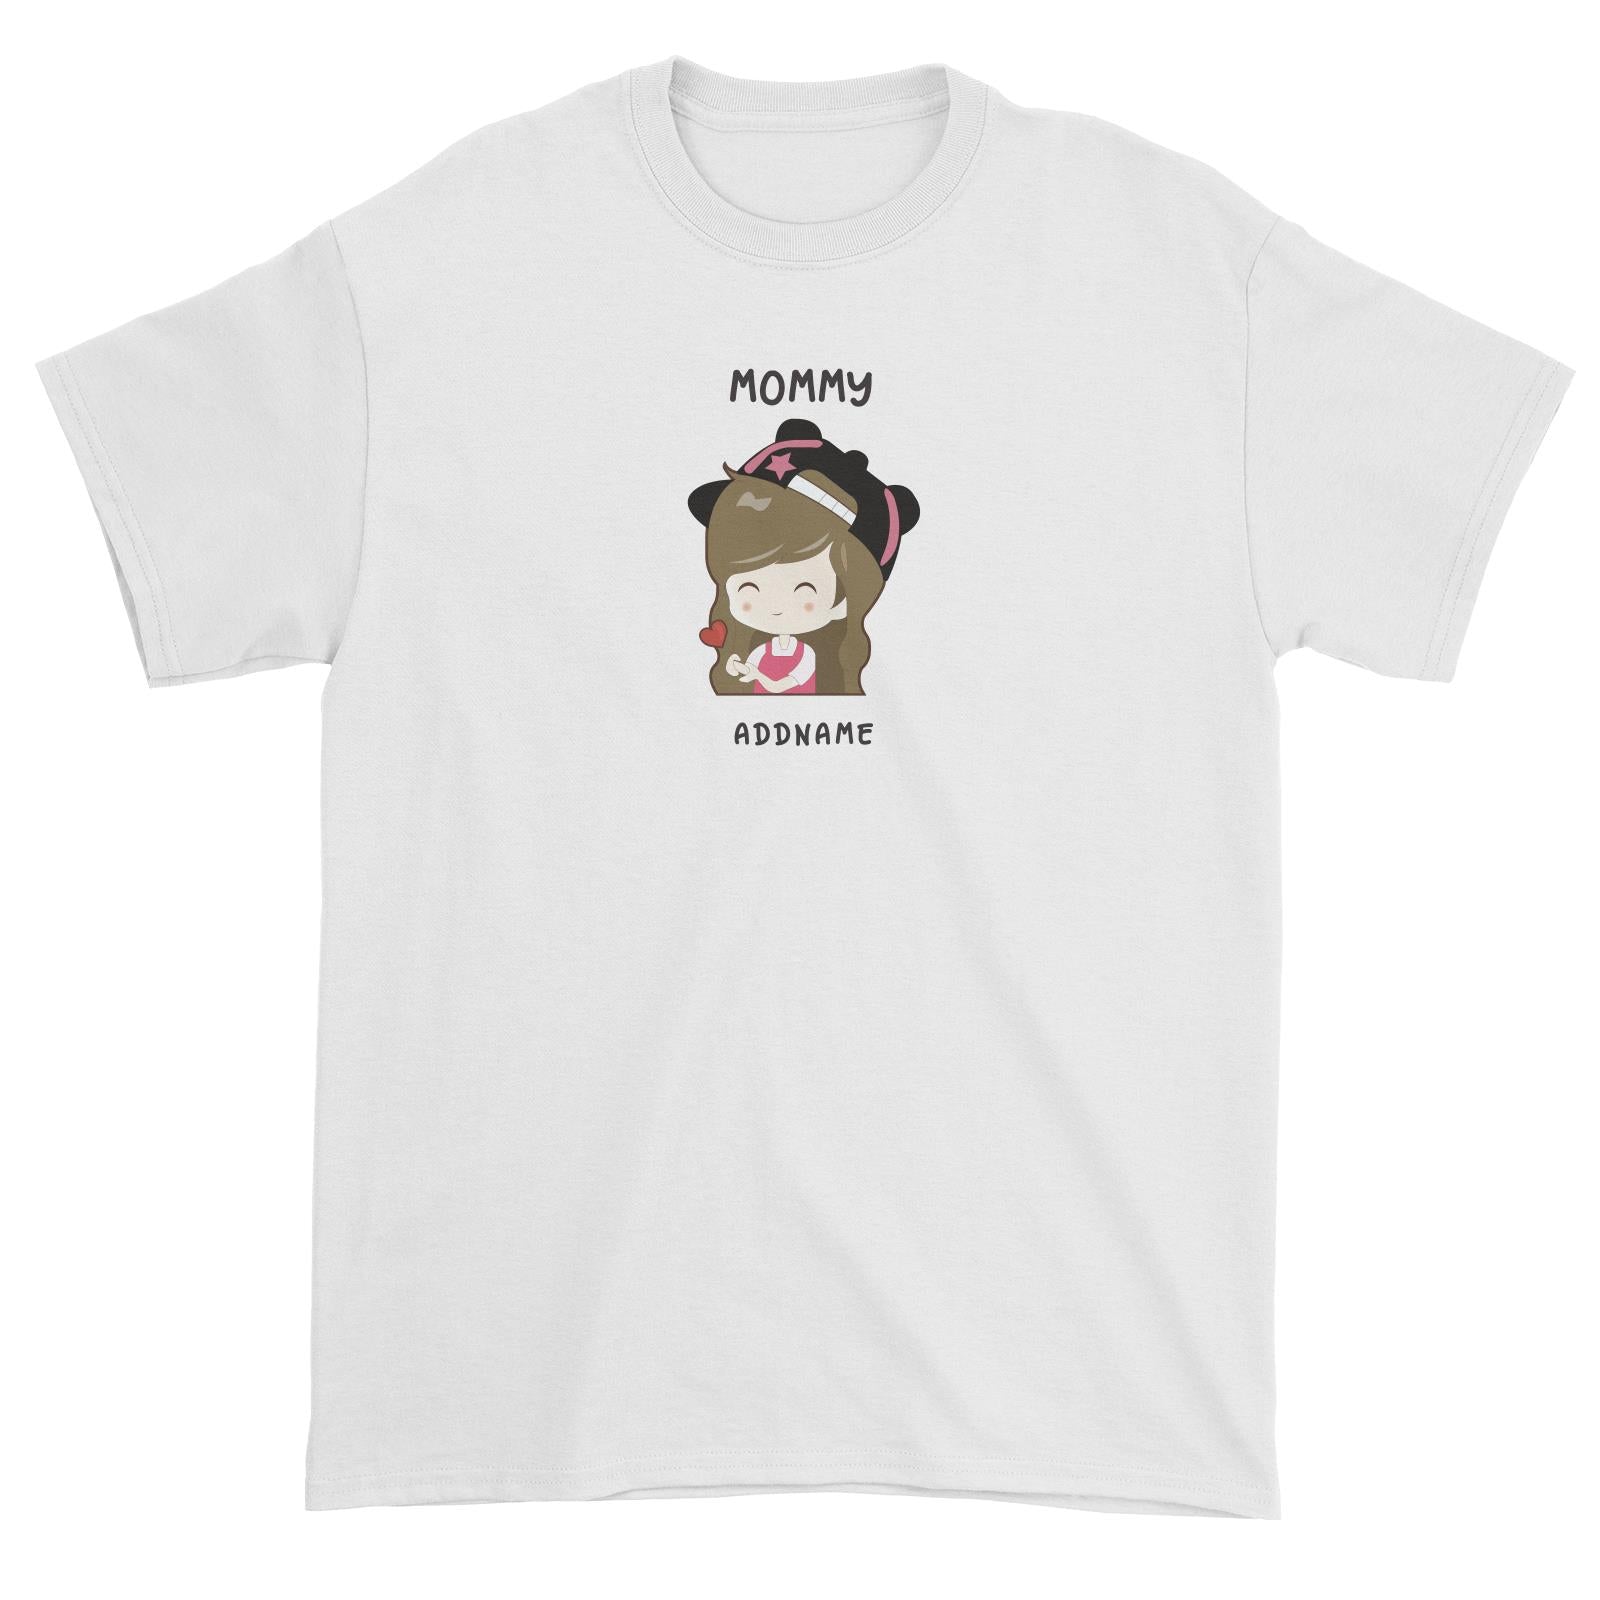 My Lovely Family Series Mommy Addname Unisex T-Shirt (FLASH DEAL)